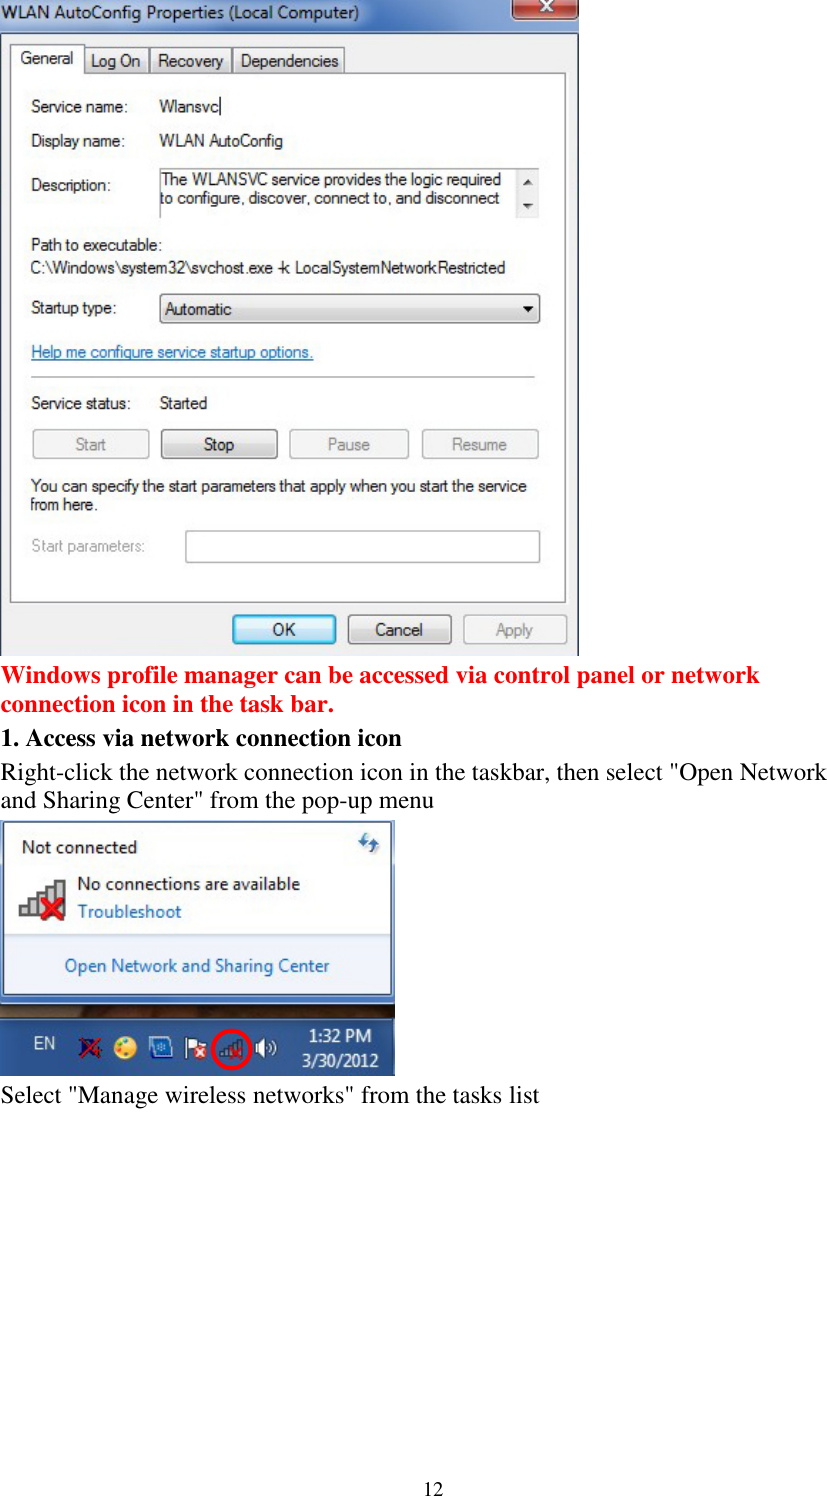 12Windows profile manager can be accessed via control panel or networkconnection icon in the task bar.1. Access via network connection iconRight-click the network connection icon in the taskbar, then select &quot;Open Networkand Sharing Center&quot; from the pop-up menuSelect &quot;Manage wireless networks&quot; from the tasks list